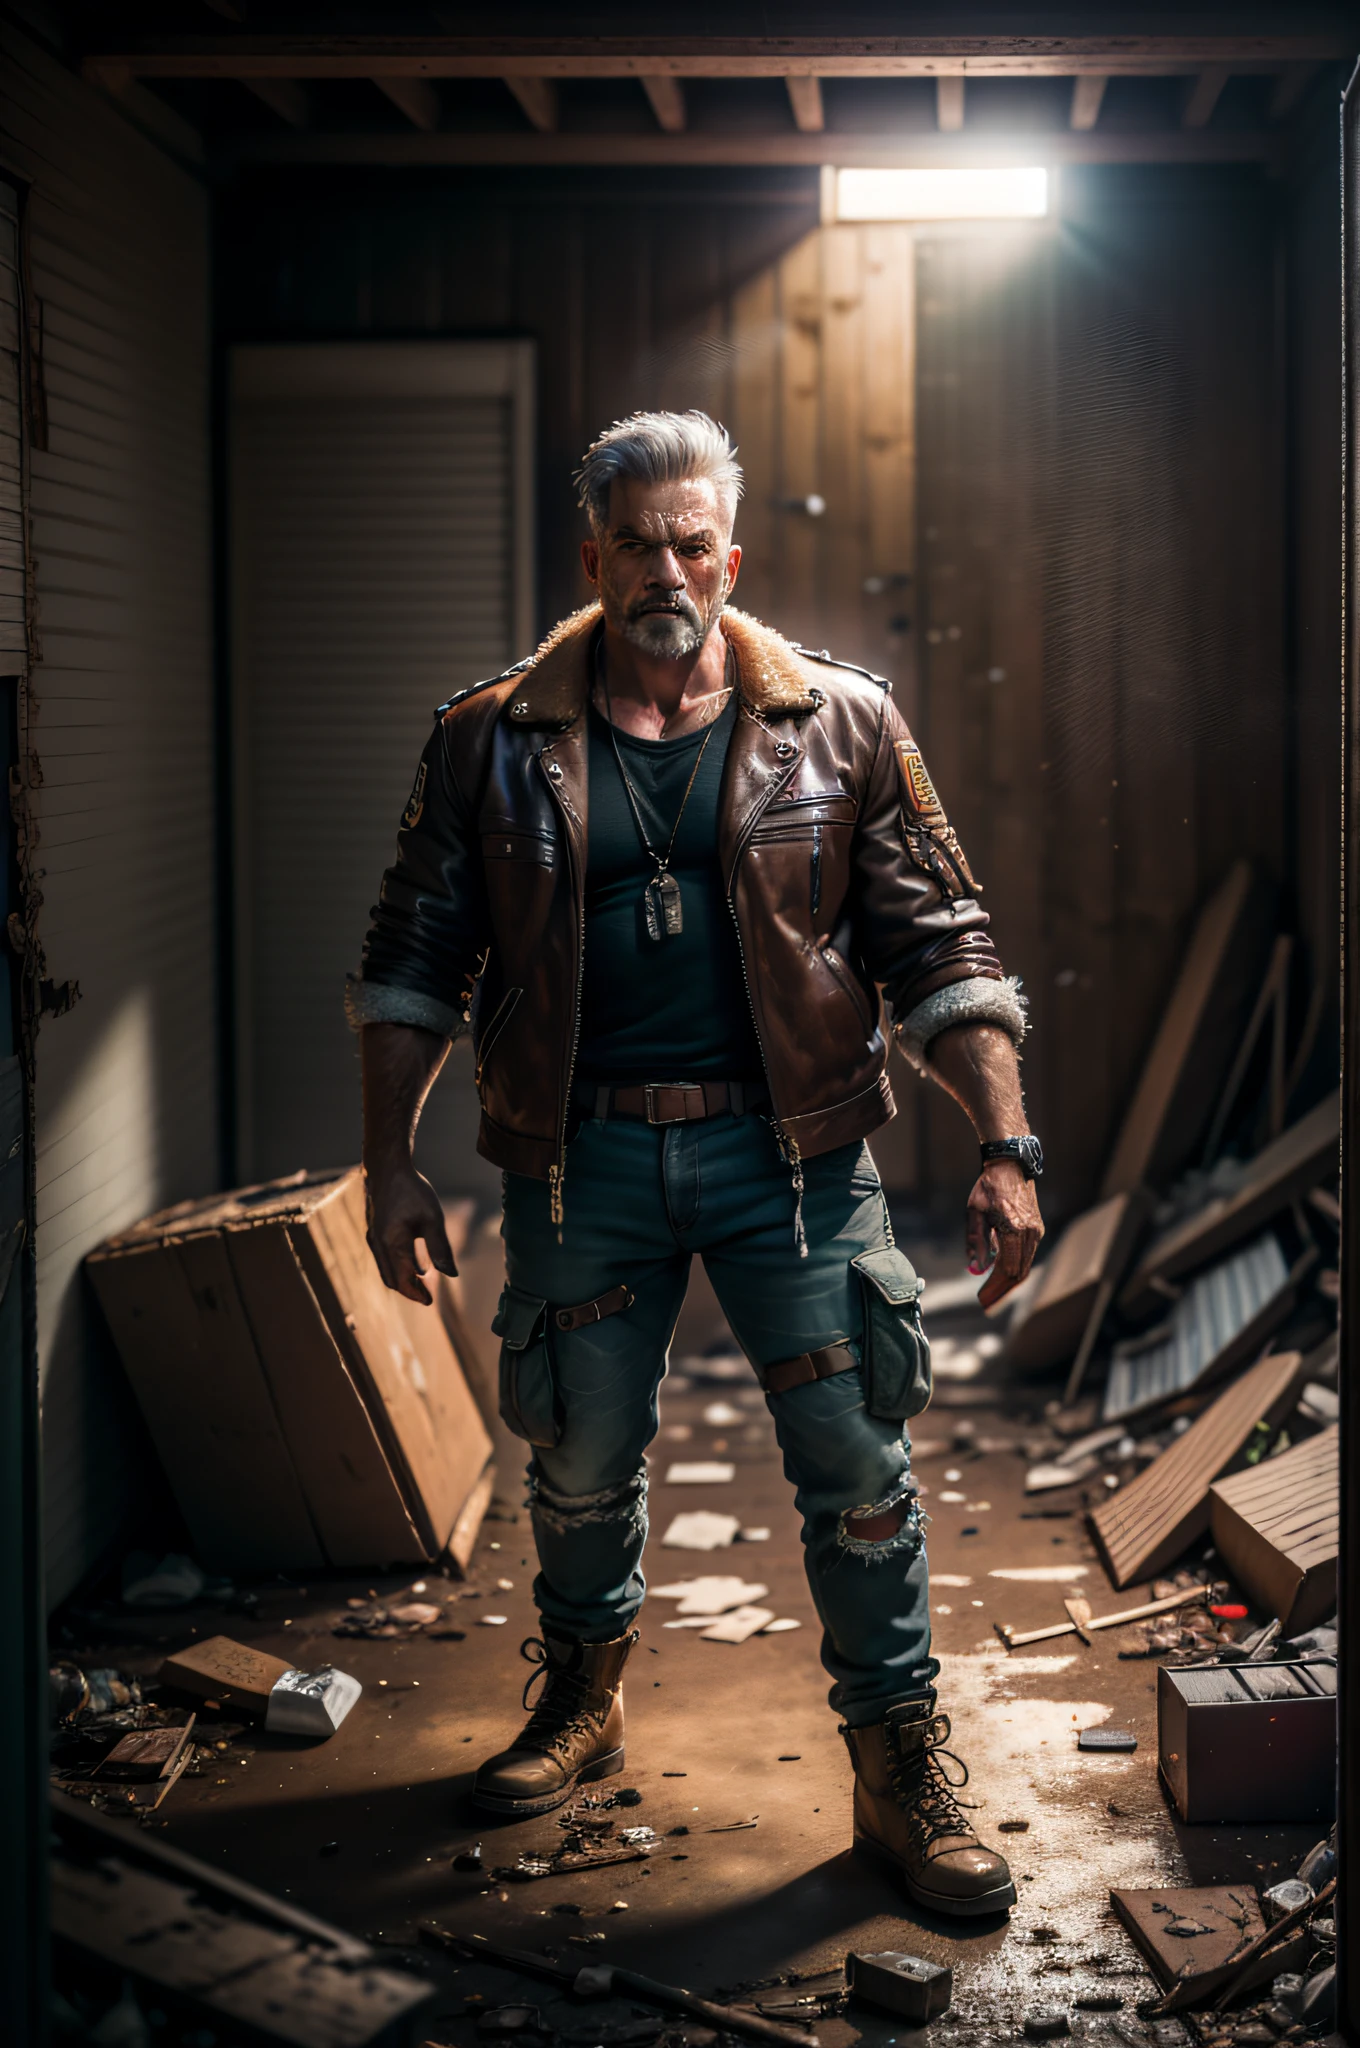 8k, realistic, vray, HDR, 1man, extremely strong, very well detailed old beat up leather jacket, cargo pants, military boots, scar marks, skin texture, stubble, standing in an abandoned shed totally destroyed and full of garbage and remains of equipment, light beam from the sun passing through the gaps, high quality image, apocalyptic and extremely detailed image